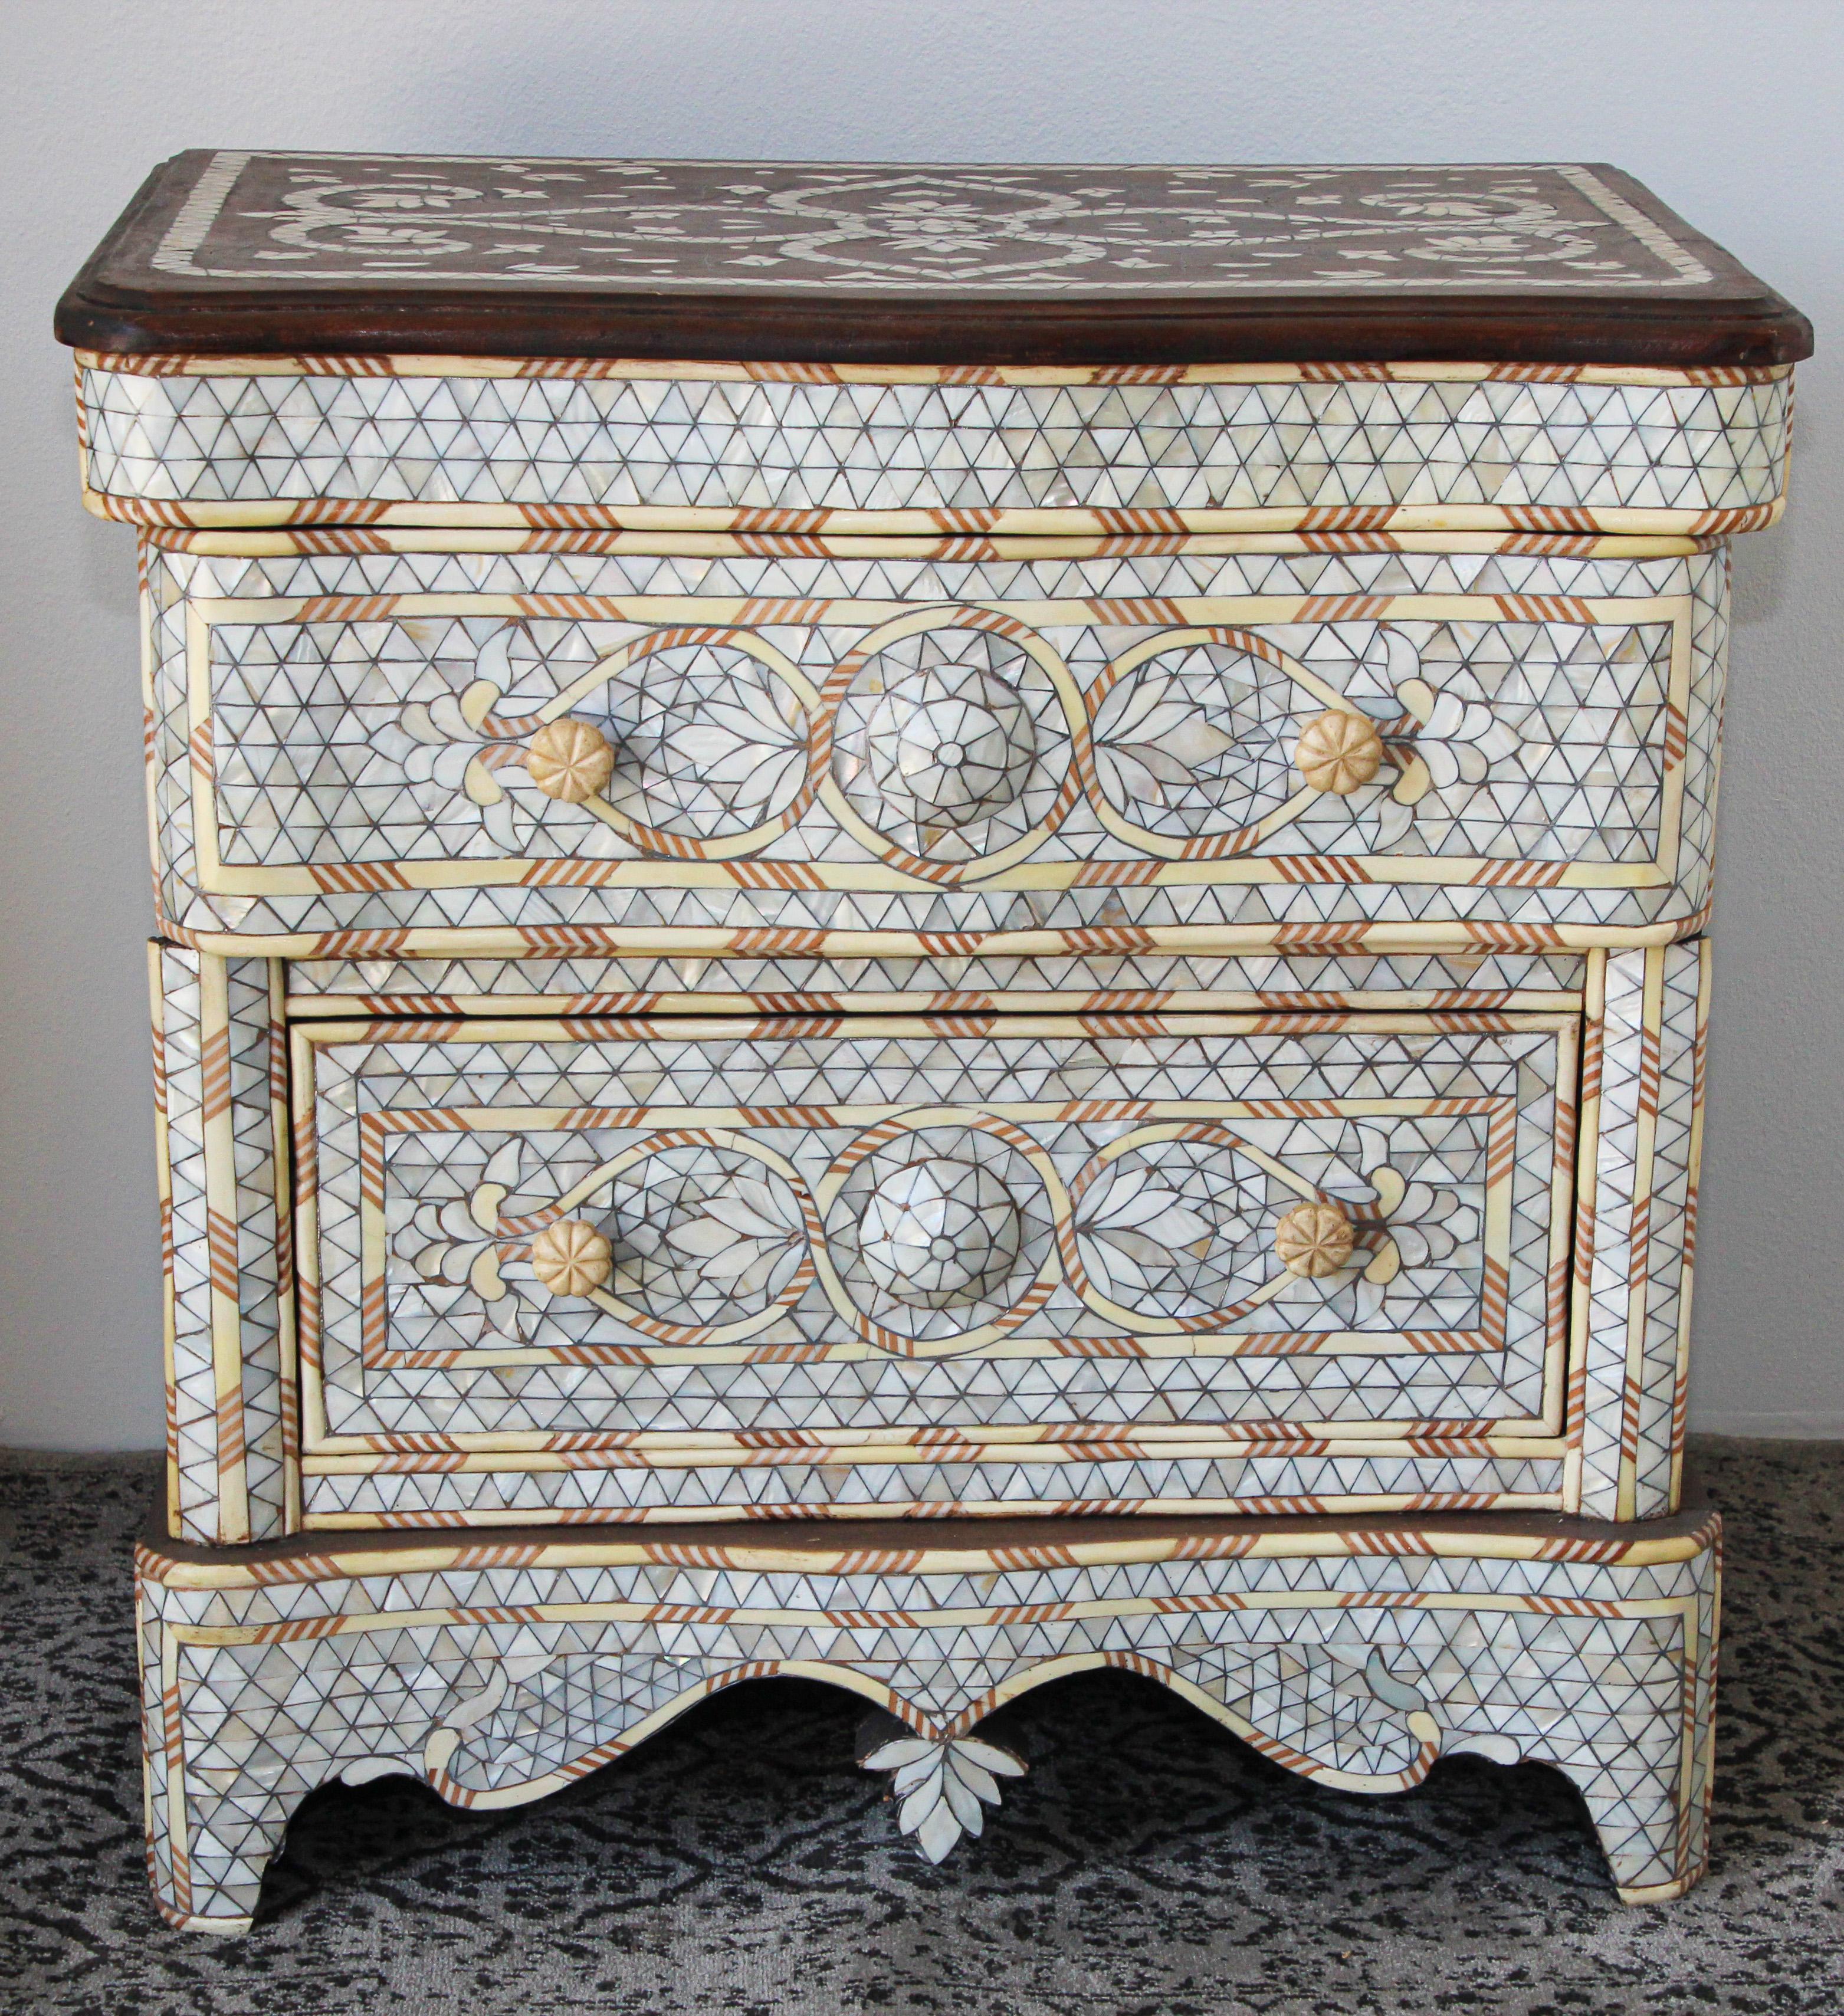 Fabulous Middle Eastern Syrian style Moroccan nightstand.
Handcrafted contemporary Moroccan dresser with two drawers, wood inlay with white mother of pearl.
Moorish arches and intricate Islamic designs.
Dowry chest of drawers heavily inlaid in